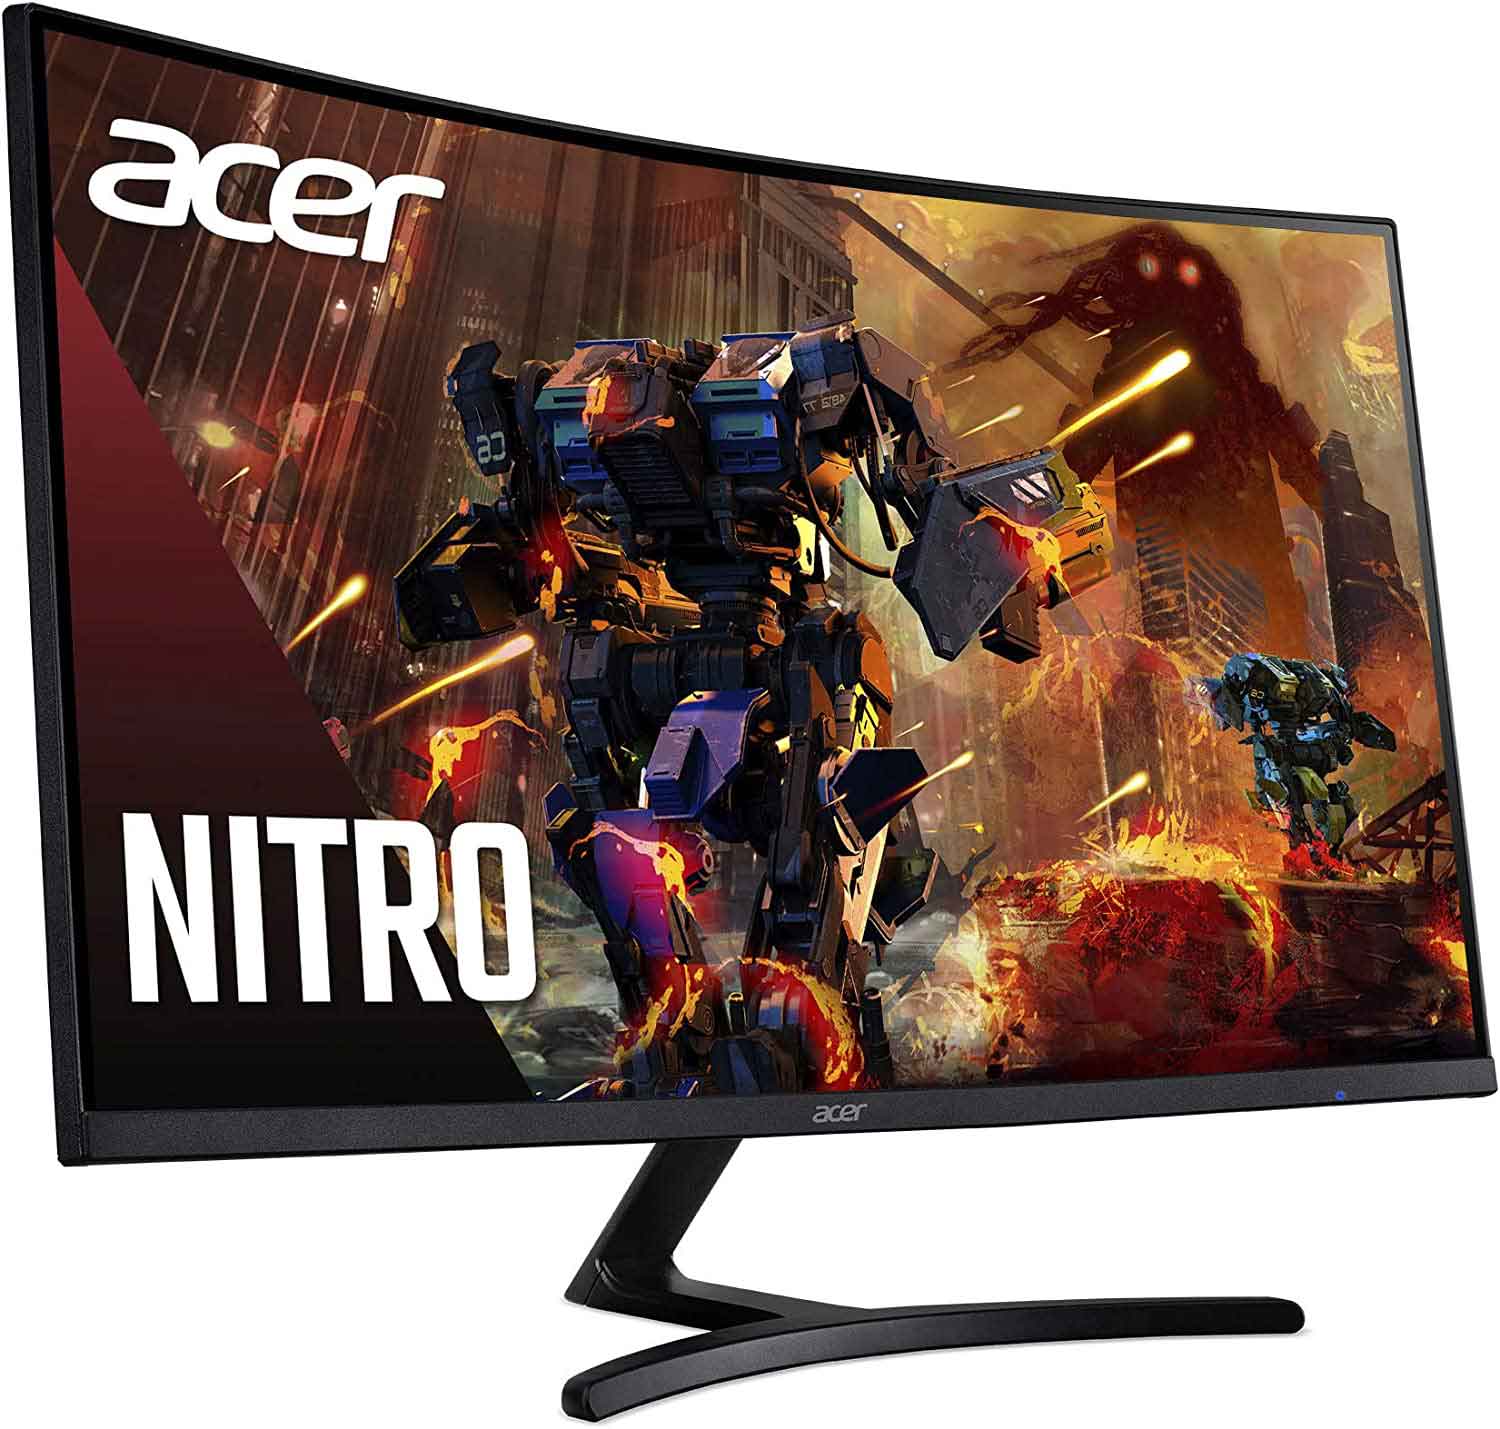 Save Up to $30 on Acer ED323QU Gaming Monitor with 165Hz